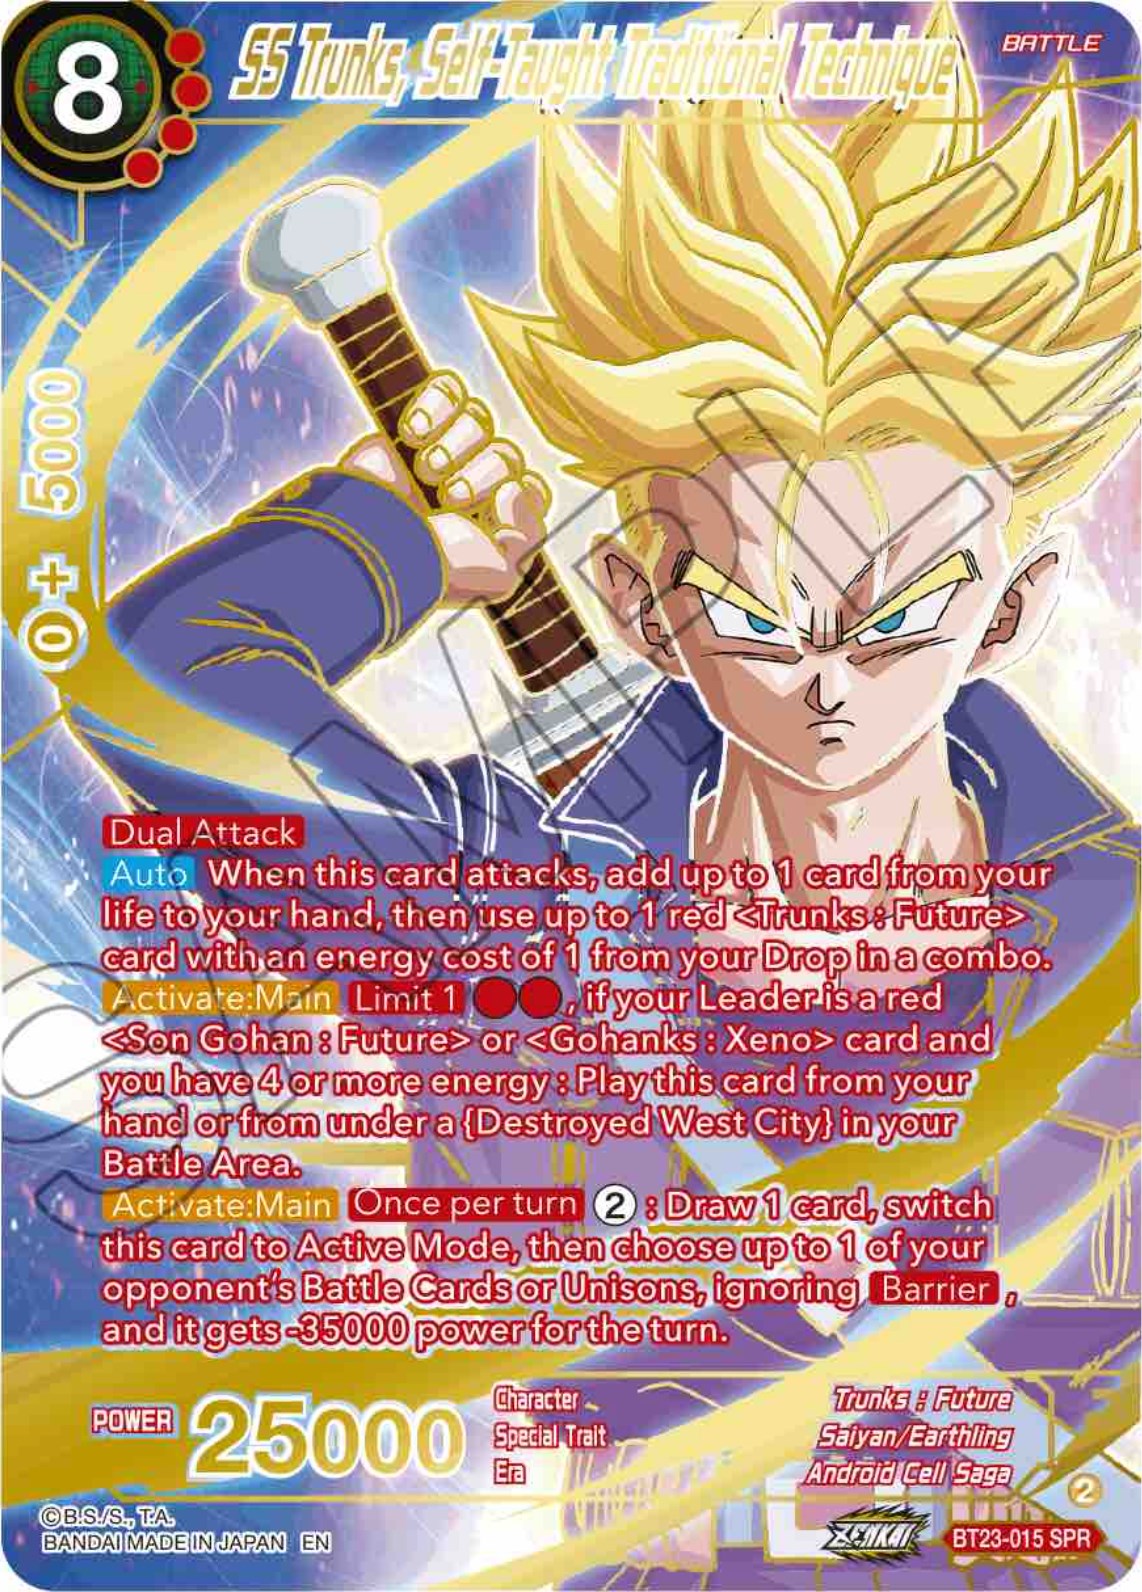 SS Trunks, Self-Taught Traditional Technique (SPR) (BT23-015) [Perfect Combination] | Mindsight Gaming